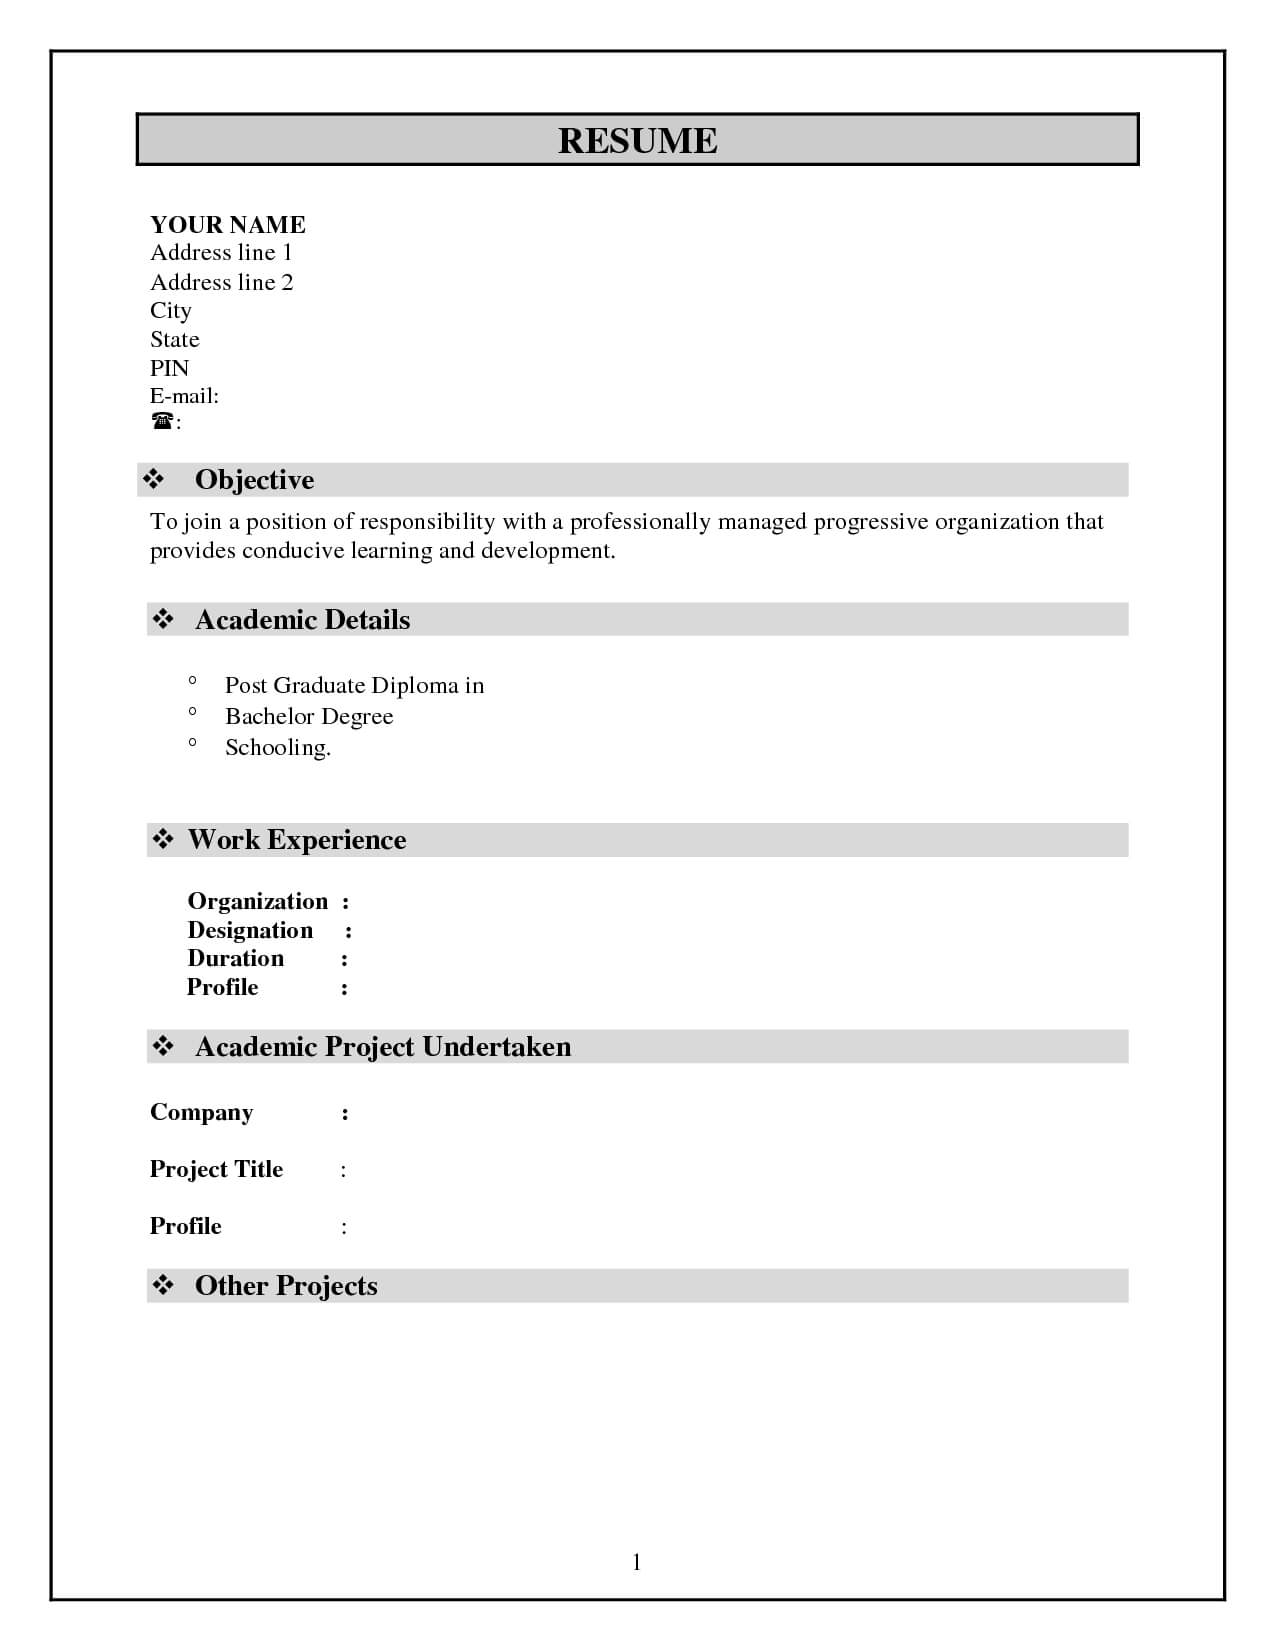 Resume Format In Microsoft Word 2007 – Forza Inside Resume Templates Word 2007